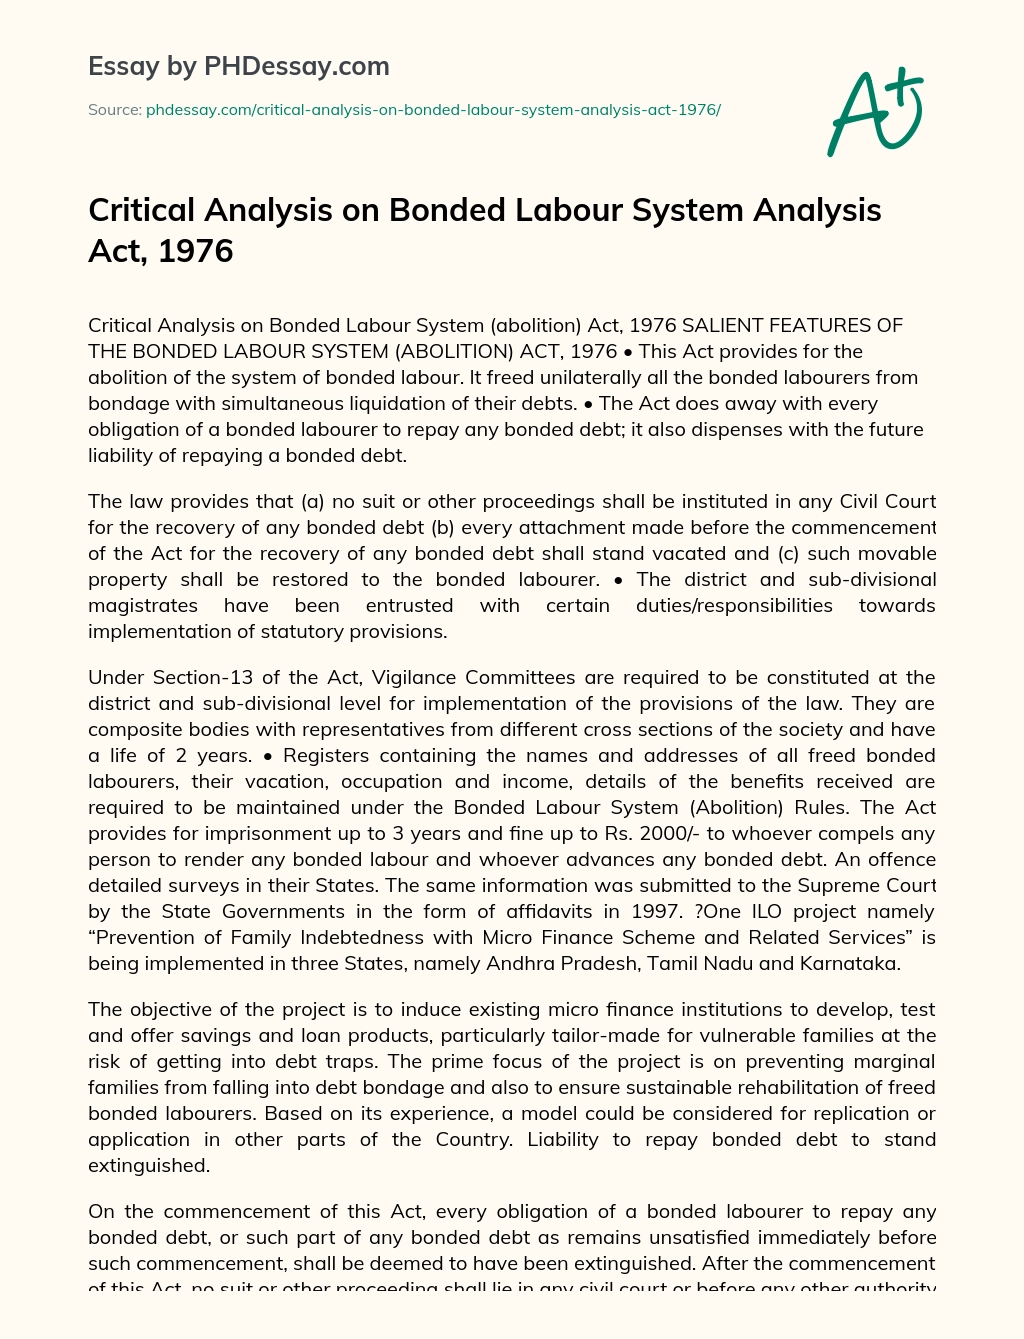 Critical Analysis on Bonded Labour System Analysis Act, 1976 essay